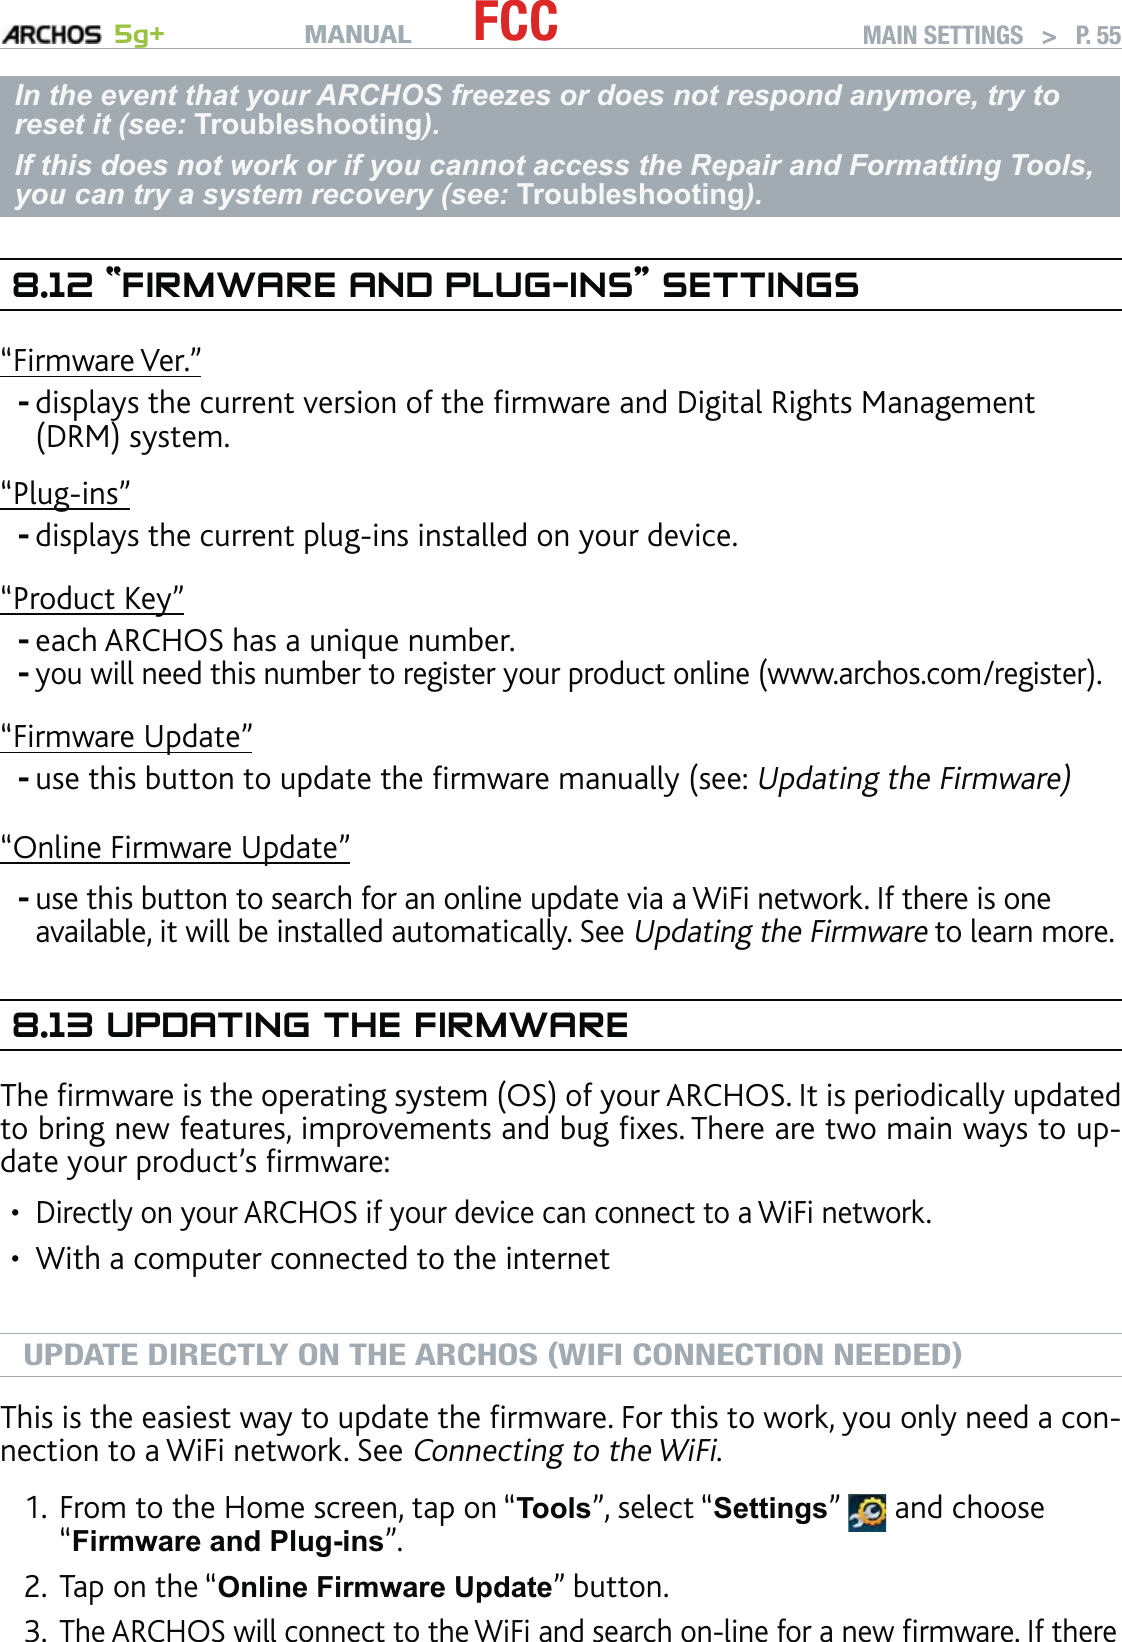 MANUAL 5g+ FCC MAIN SETTINGS   &gt;   P. 55In the event that your ARCHOS freezes or does not respond anymore, try to reset it (see: Troubleshooting). If this does not work or if you cannot access the Repair and Formatting Tools, you can try a system recovery (see: Troubleshooting).8.12 “FIRMWARE AND PLUG-INS” SETTINGS“Firmware Ver.”displays the current version of the ﬁrmware and Digital Rights Management (DRM) system.“Plug-ins”displays the current plug-ins installed on your device.“Product Key”each ARCHOS has a unique number.you will need this number to register your product online (www.archos.com/register).“Firmware Update”use this button to update the ﬁrmware manually (see: Updating the Firmware)“Online Firmware Update”use this button to search for an online update via a WiFi network. If there is one available, it will be installed automatically. See Updating the Firmware to learn more.8.13 UPDATING THE FIRMWAREThe ﬁrmware is the operating system (OS) of your ARCHOS. It is periodically updated to bring new features, improvements and bug ﬁxes. There are two main ways to up-date your product’s ﬁrmware:Directly on your ARCHOS if your device can connect to a WiFi network.With a computer connected to the internetUPDATE DIRECTLY ON THE ARCHOS (WIFI CONNECTION NEEDED)This is the easiest way to update the ﬁrmware. For this to work, you only need a con-nection to a WiFi network. See Connecting to the WiFi.From to the Home screen, tap on “Tools”, select “Settings”   and choose “Firmware and Plug-ins”.Tap on the “Online Firmware Update” button. The ARCHOS will connect to the WiFi and search on-line for a new ﬁrmware. If there ------••1.2.3.